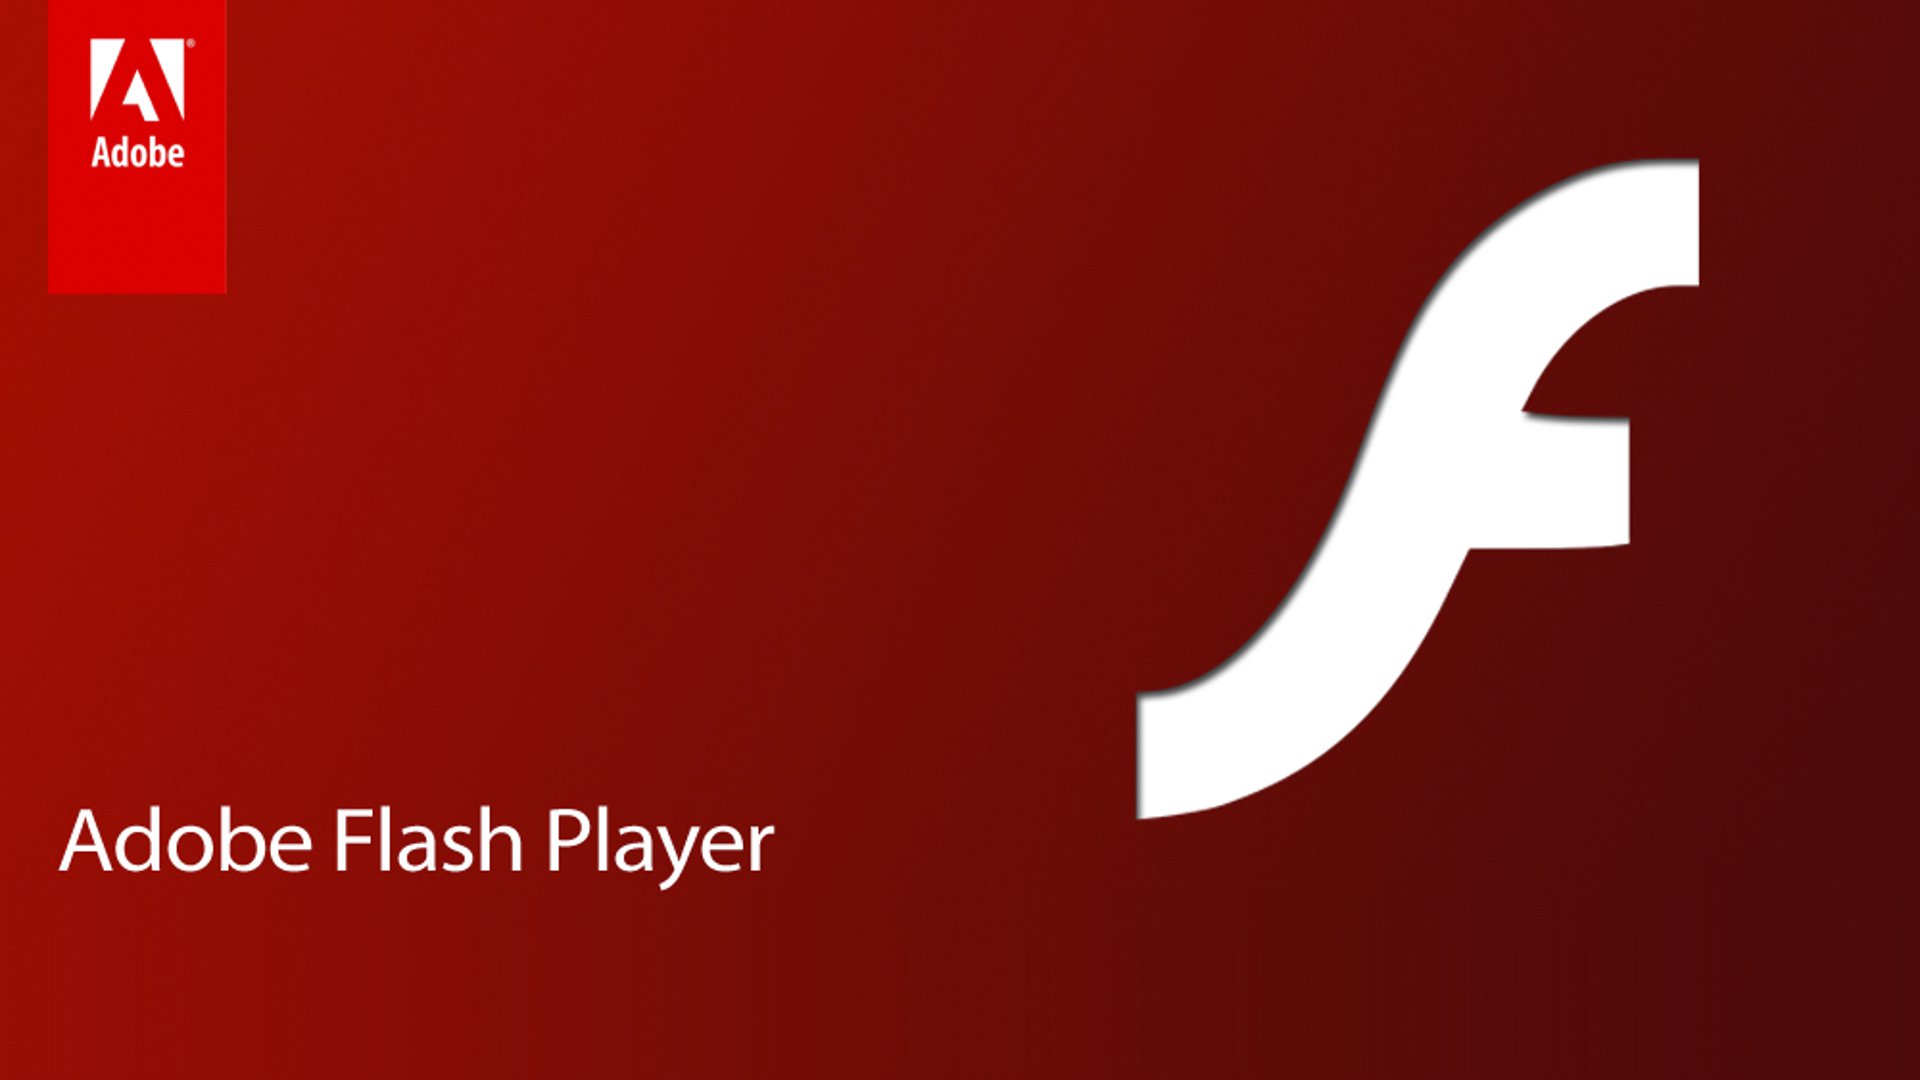 Adobe Flash Player 10 2 159 1 Final 2019 Ver.8.8 Decoded